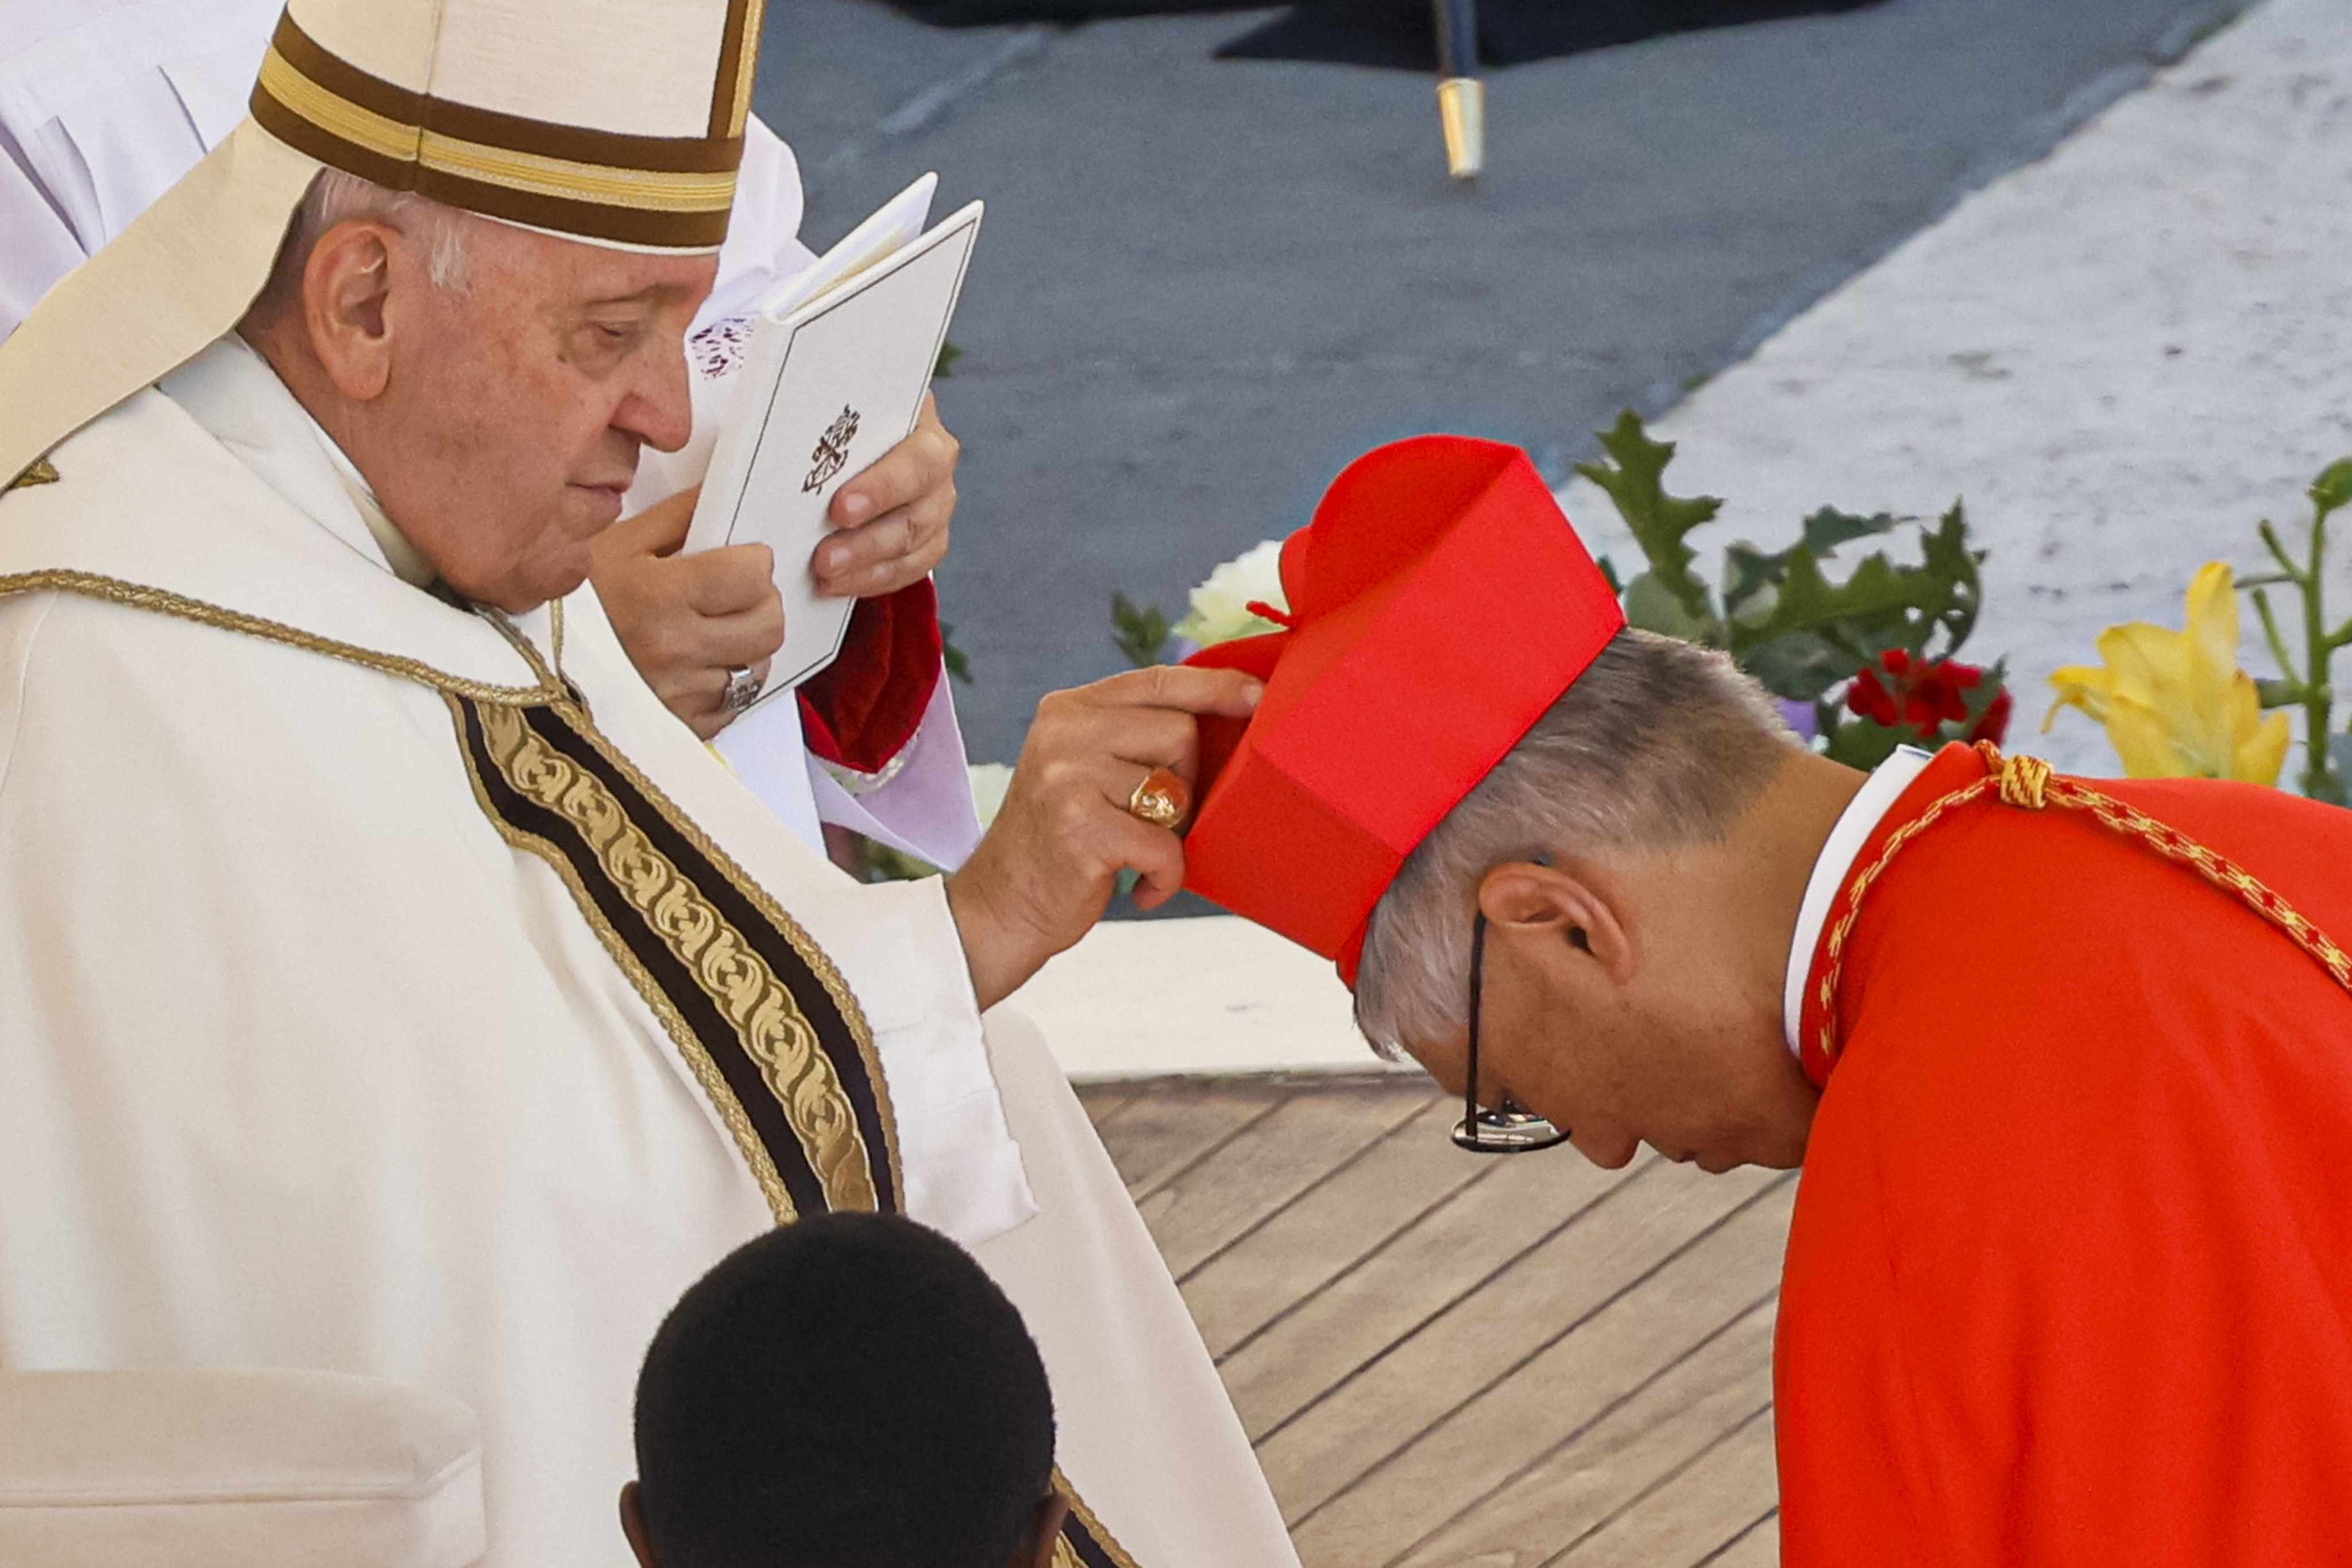 Newly elected Cardinal Stephen Chow, Bishop of Hong Kong (right) receives his biretta from Pope Francis as he is elevated in St. Peter’s Square at The Vatican. Photo: AP